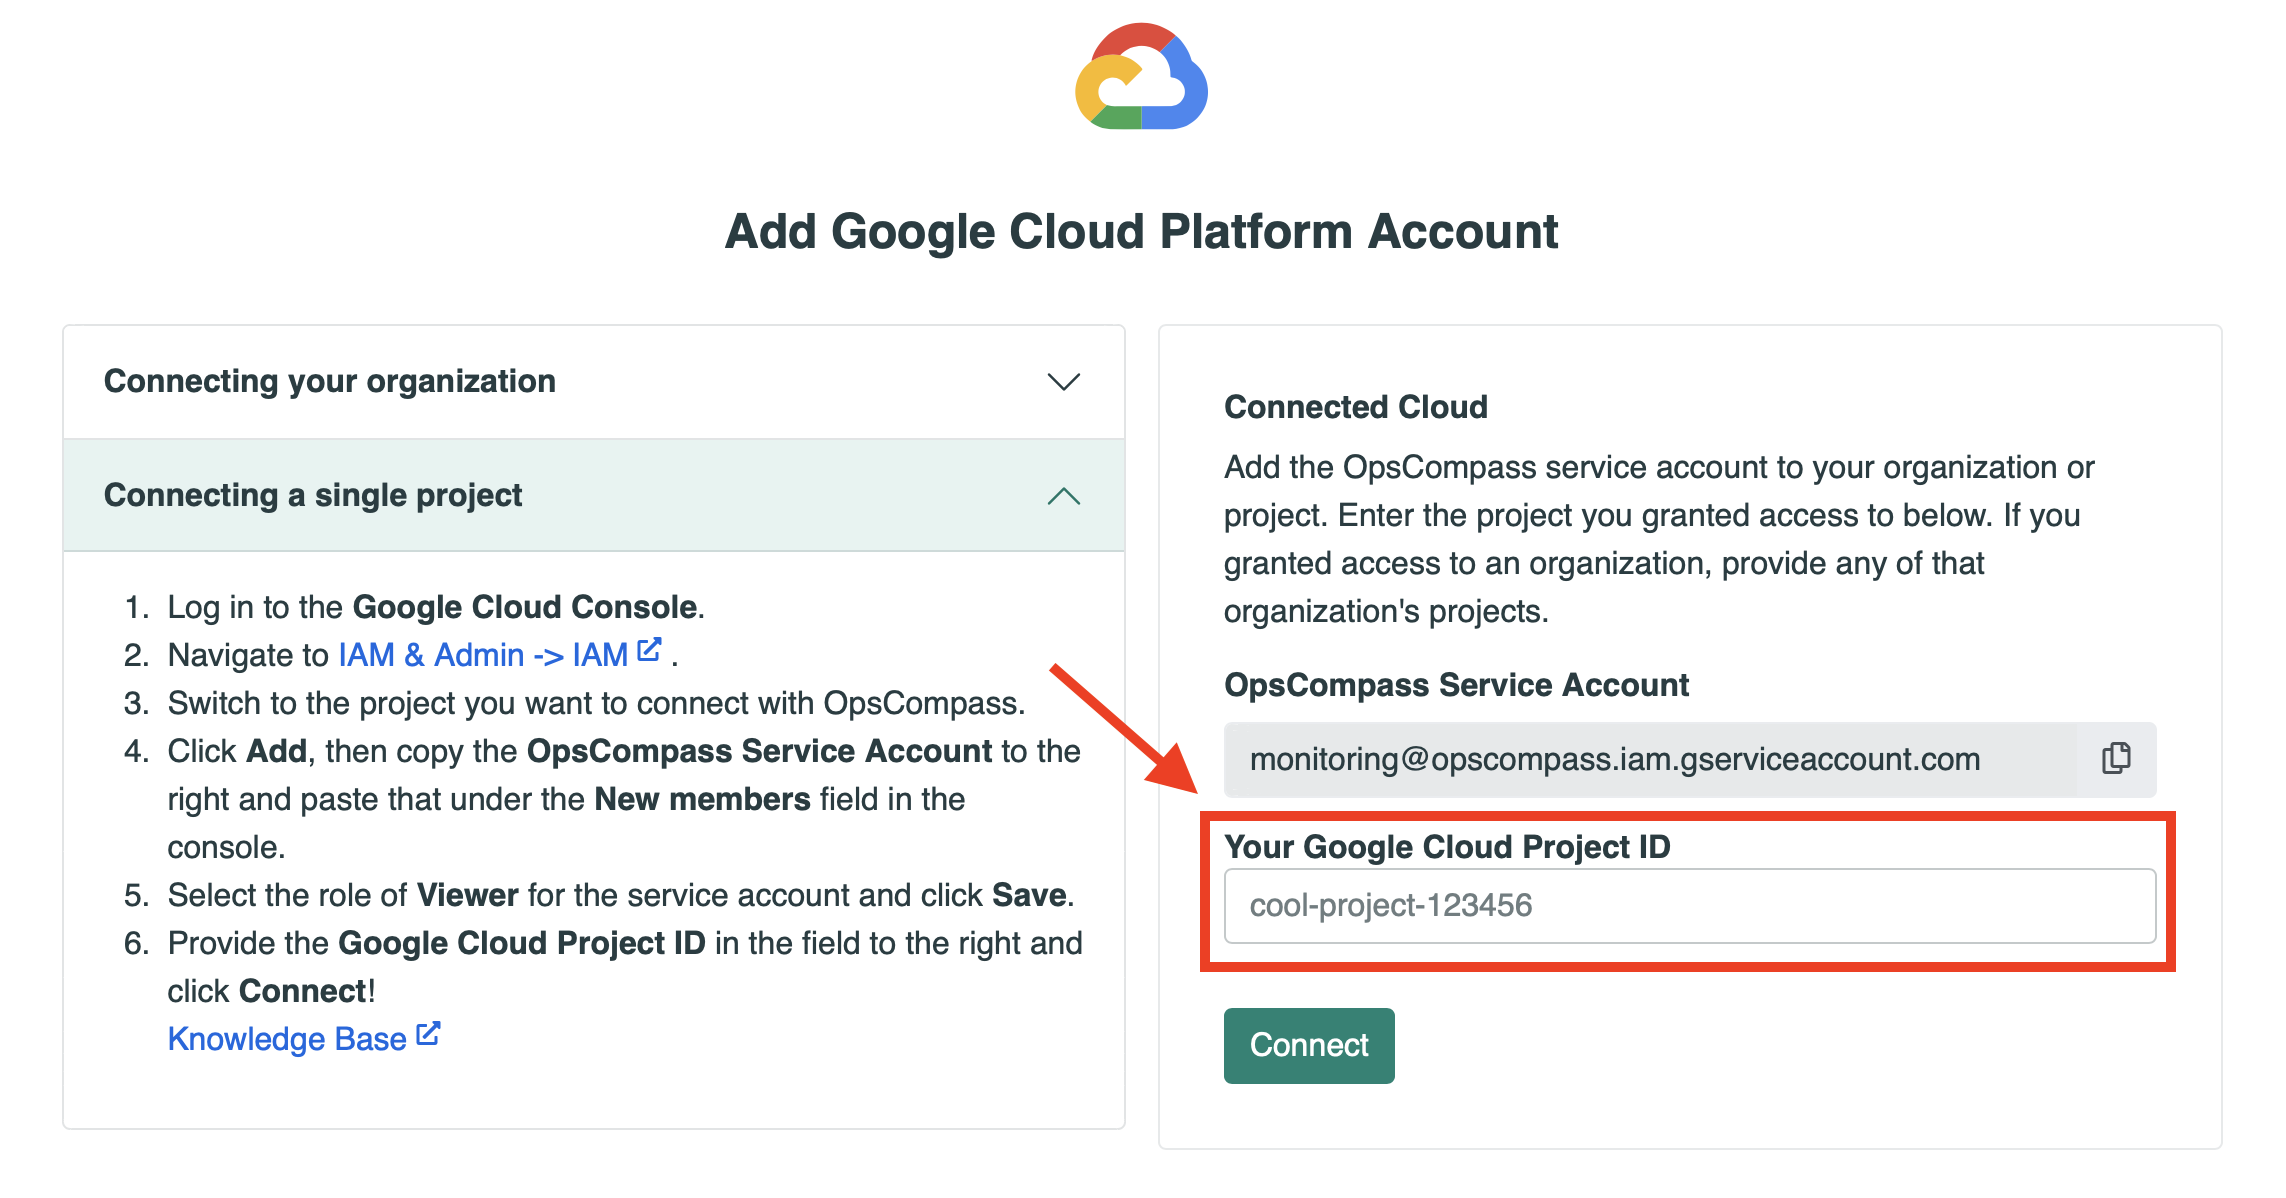 Image of the add Google Cloud Platform Account page